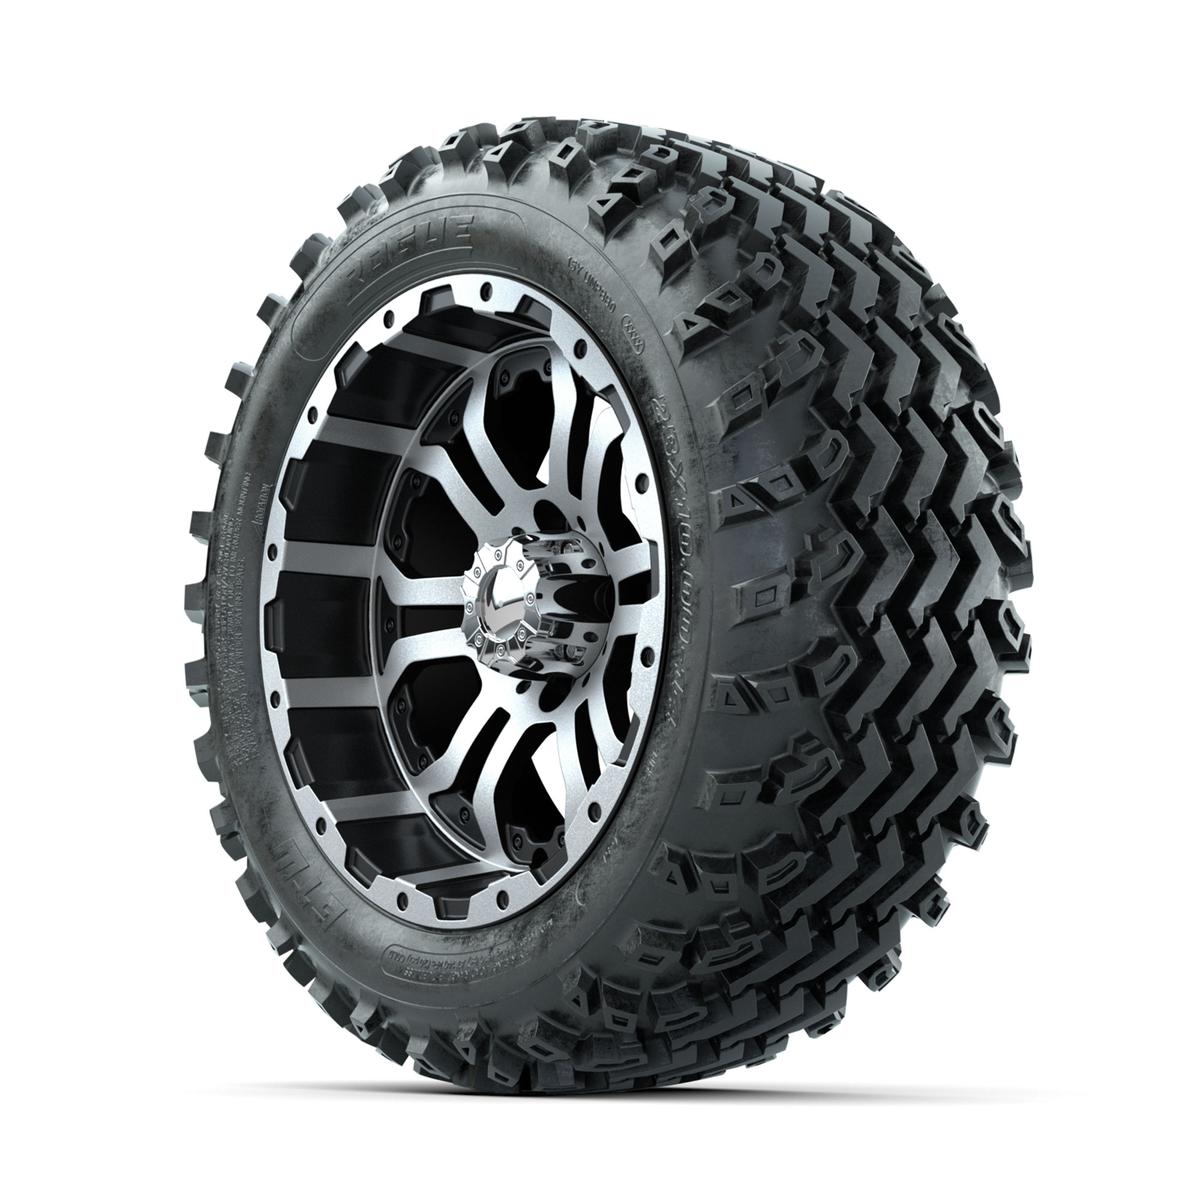 GTW Omega Machined/Black 14 in Wheels with 23x10.00-14 Rogue All Terrain Tires – Full Set